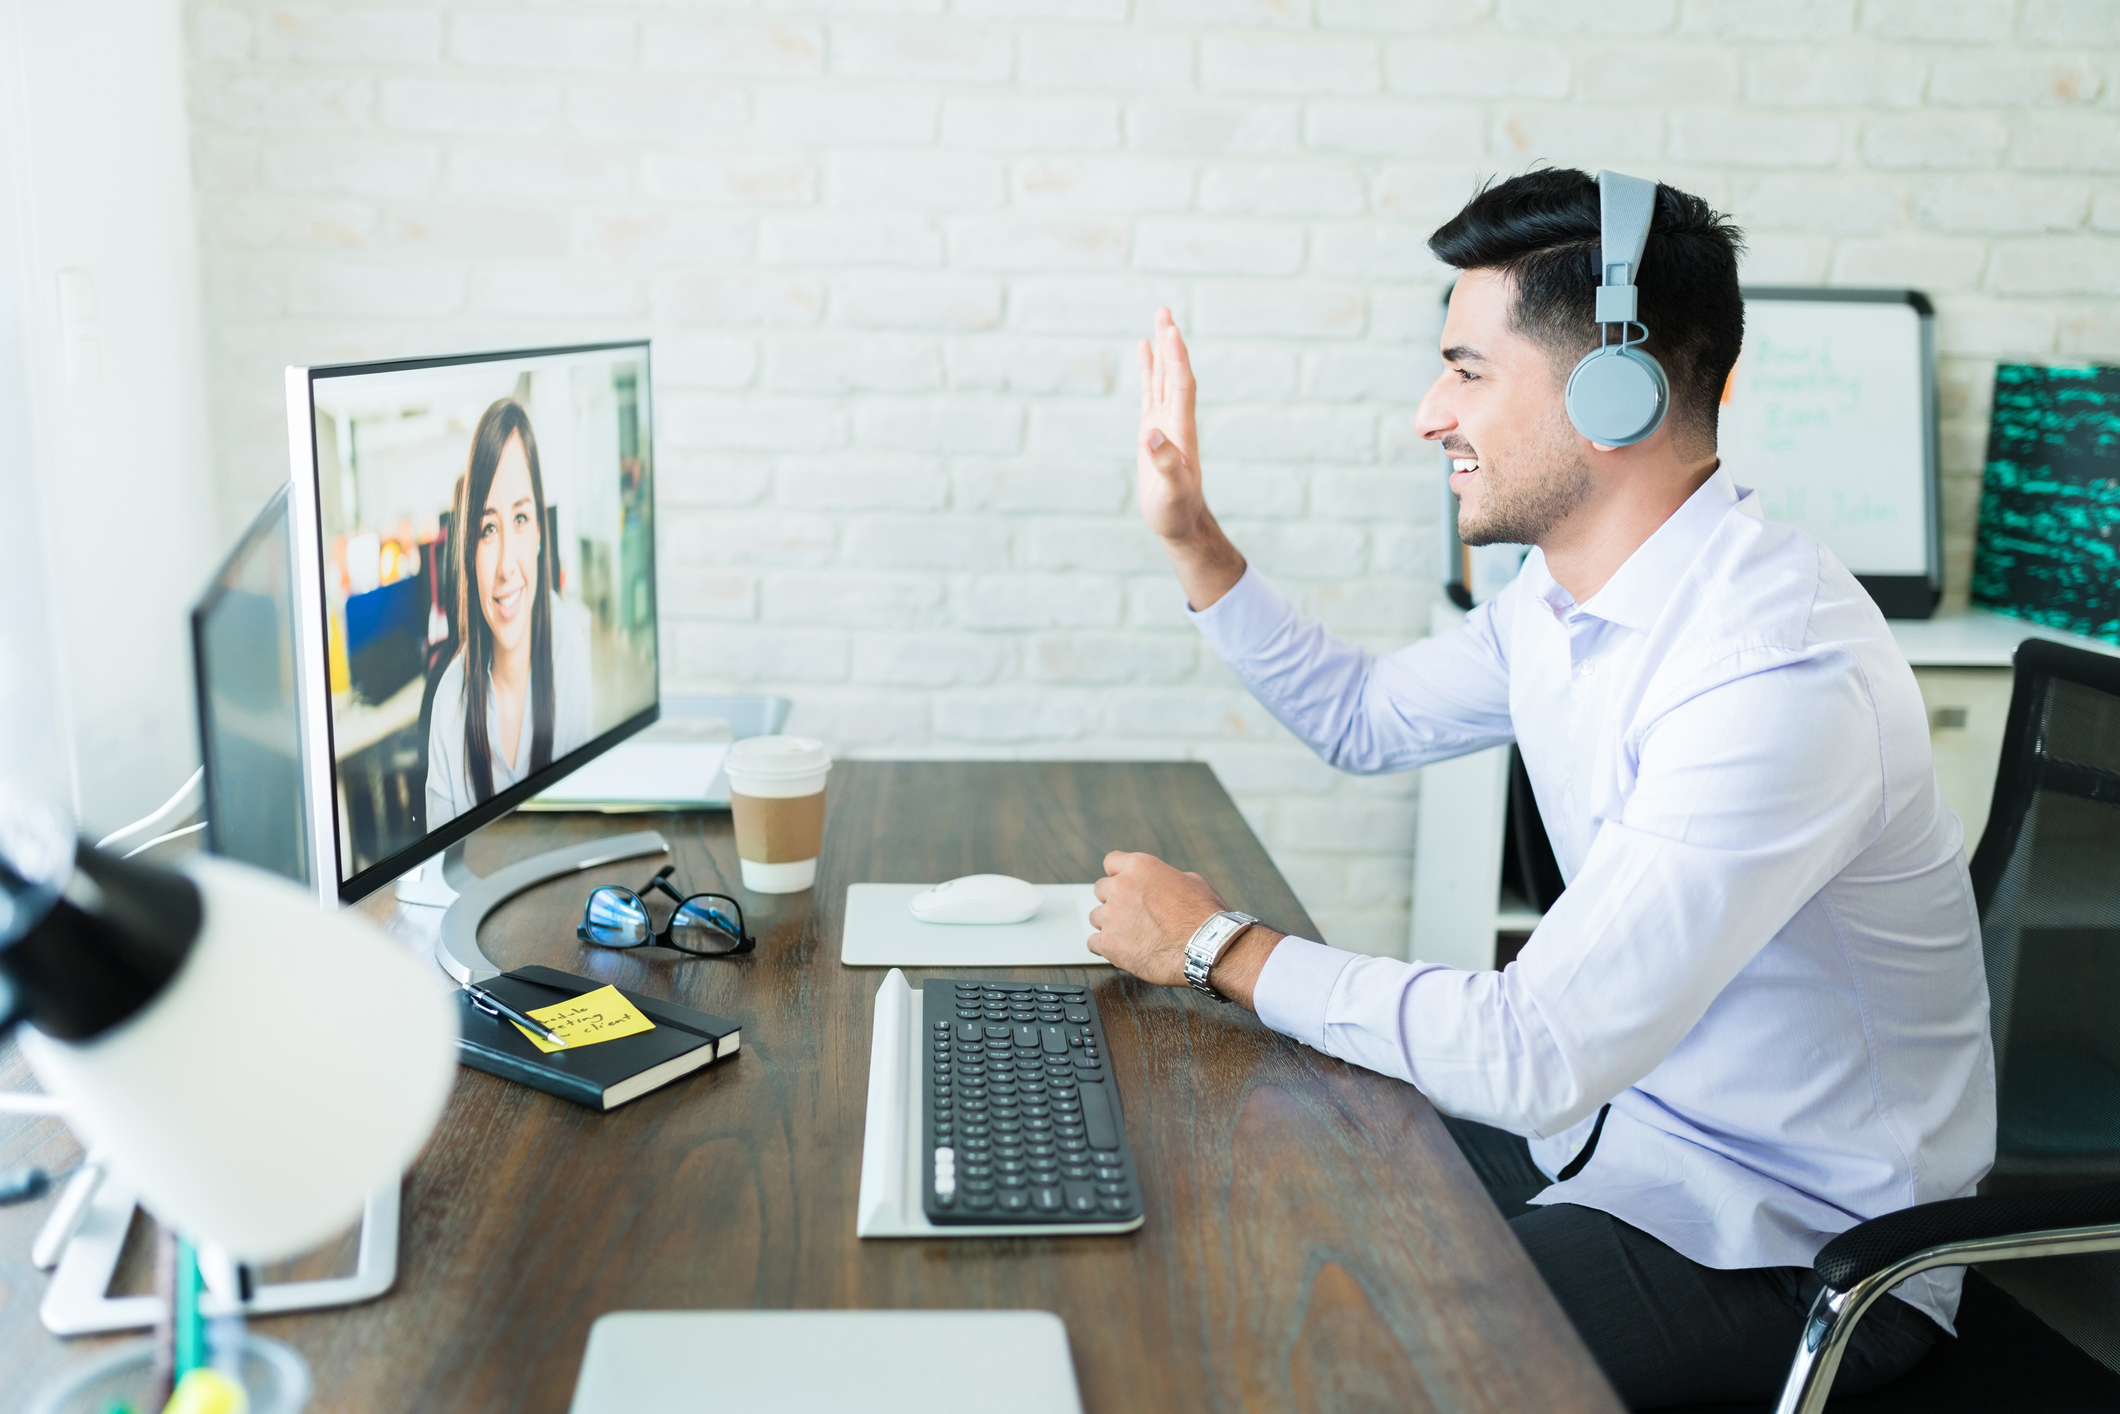 Introducing Video Conferencing to Your Clients in the Midst of the Coronavirus